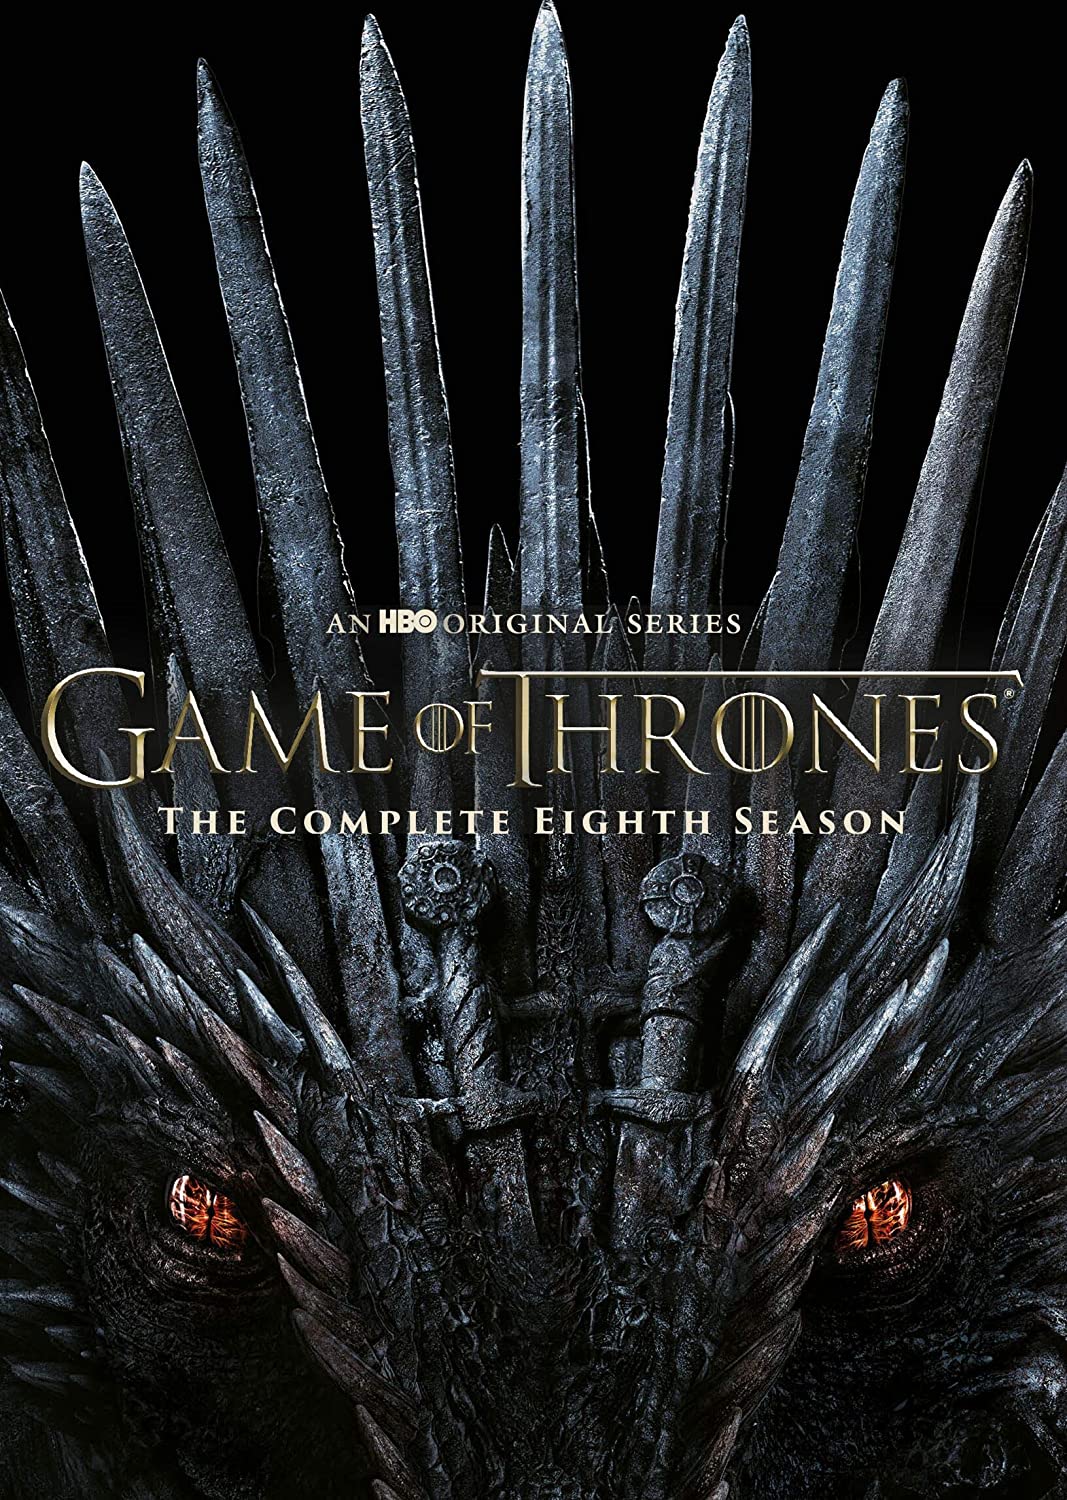 Game of Thrones: S8 (DVD) $9.96 at Amazon